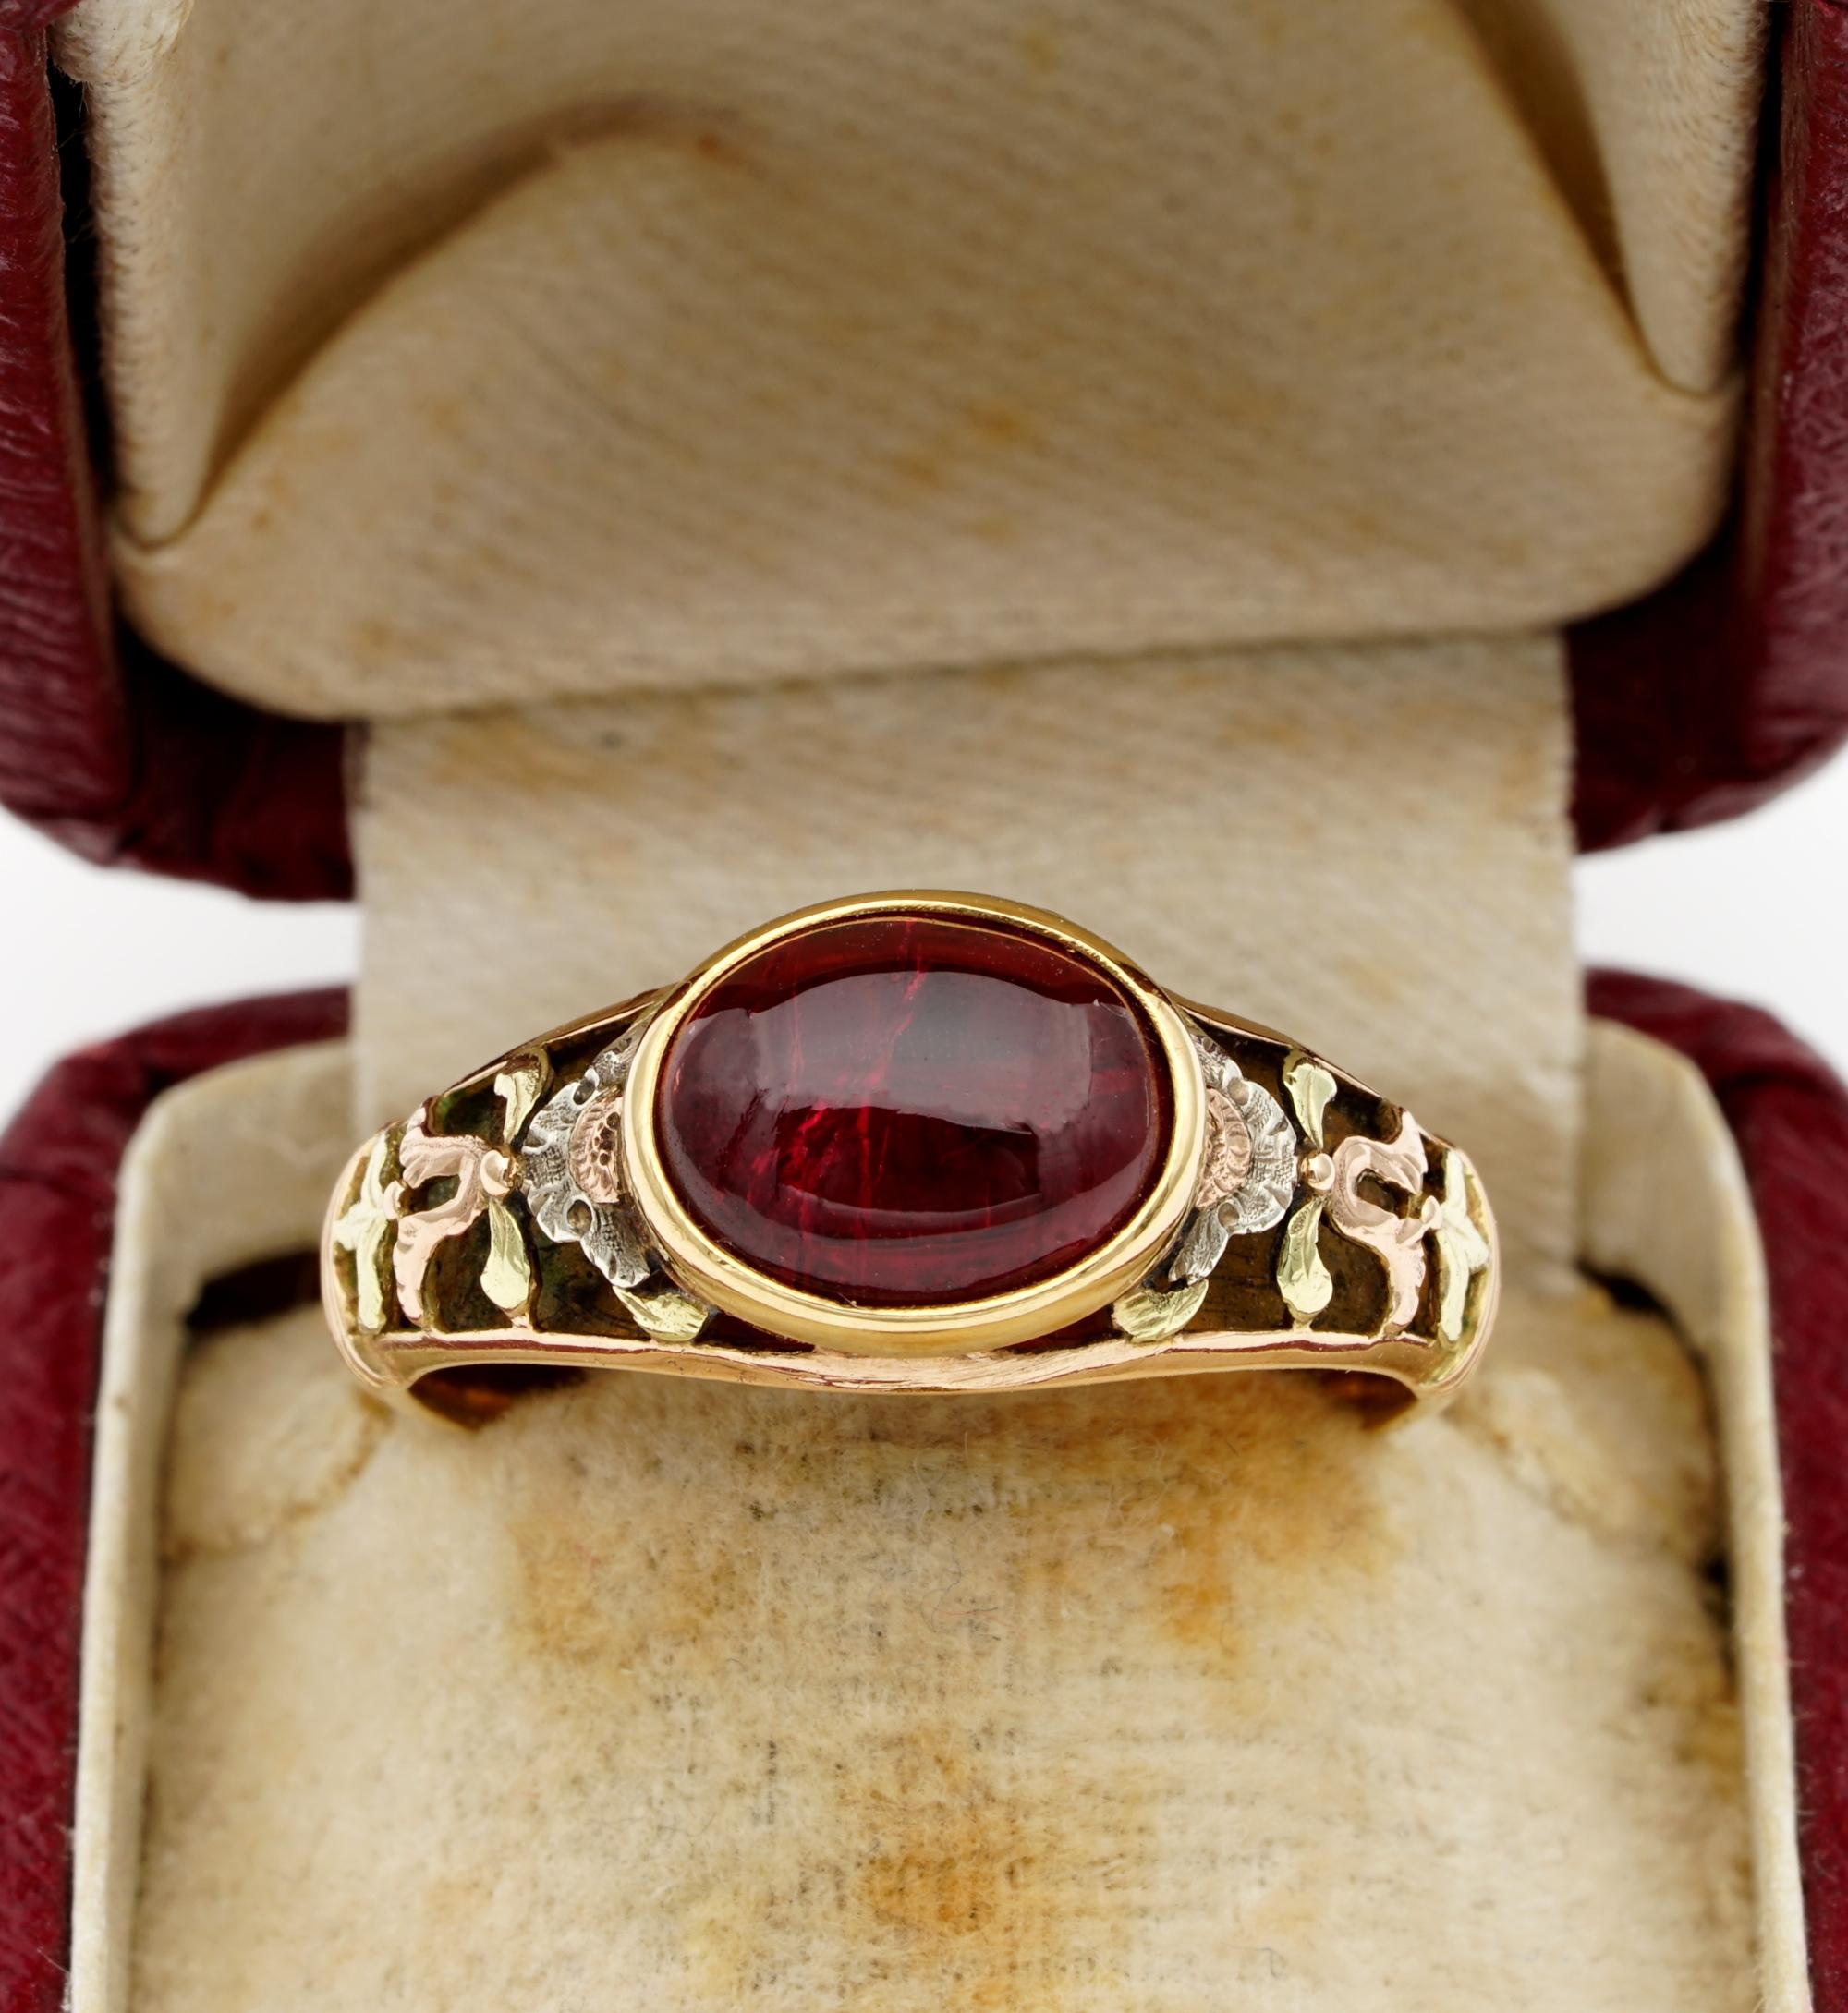 So Rare to Treasure!

This very unusual Victorian ring attracts for beauty of the mount and mesmerizing Blood Red to the stone further than secret hidden compartment to the crown 
Amazing pierce work to the sides with a plain back shank and lovely